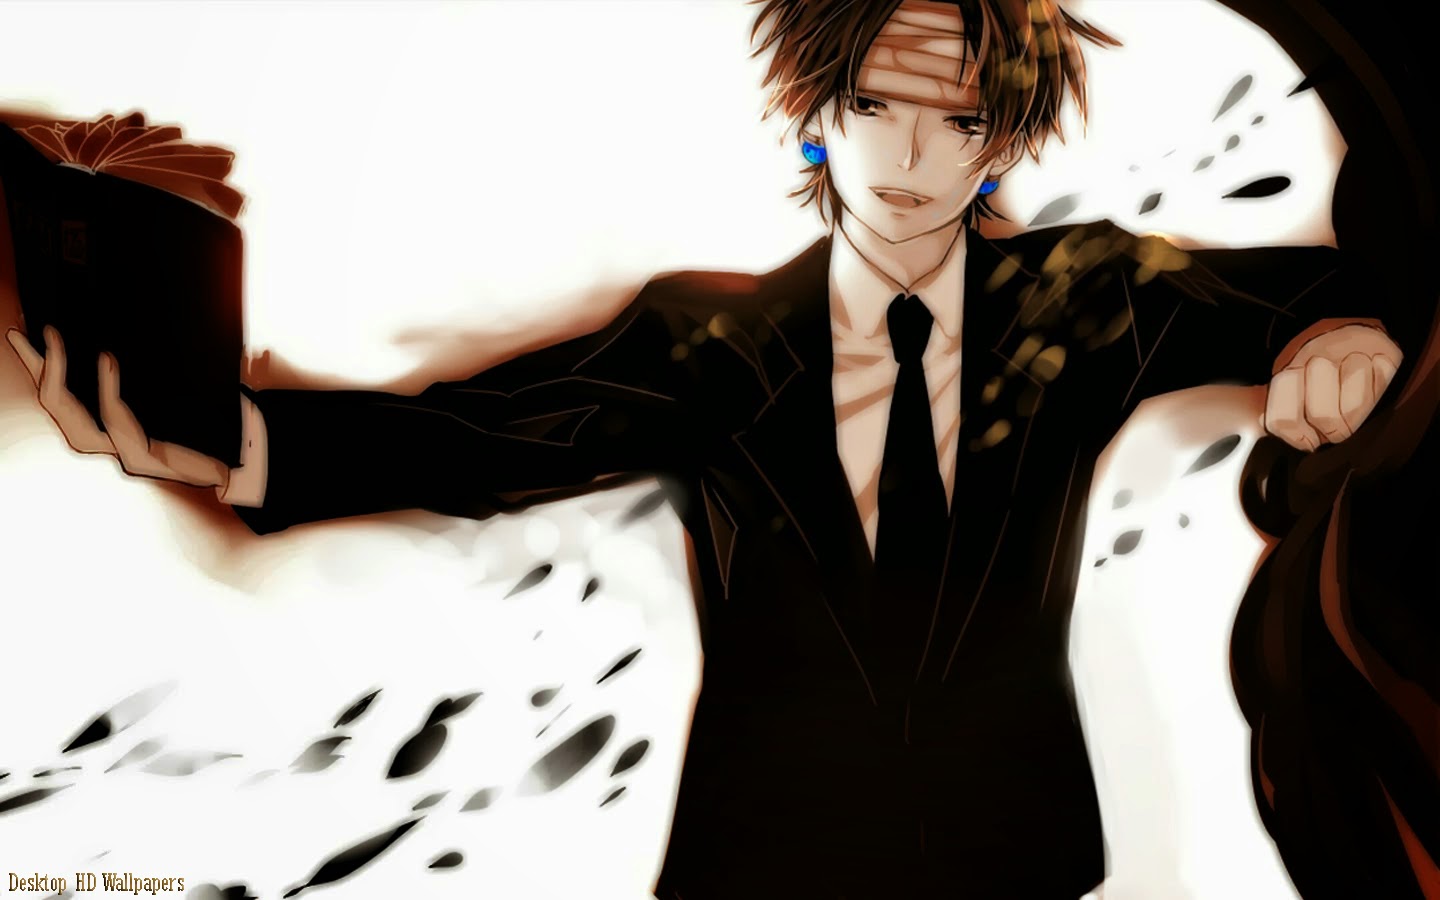 Chrollo Lucifer wallpaper by Lucious666  Download on ZEDGE  88b1